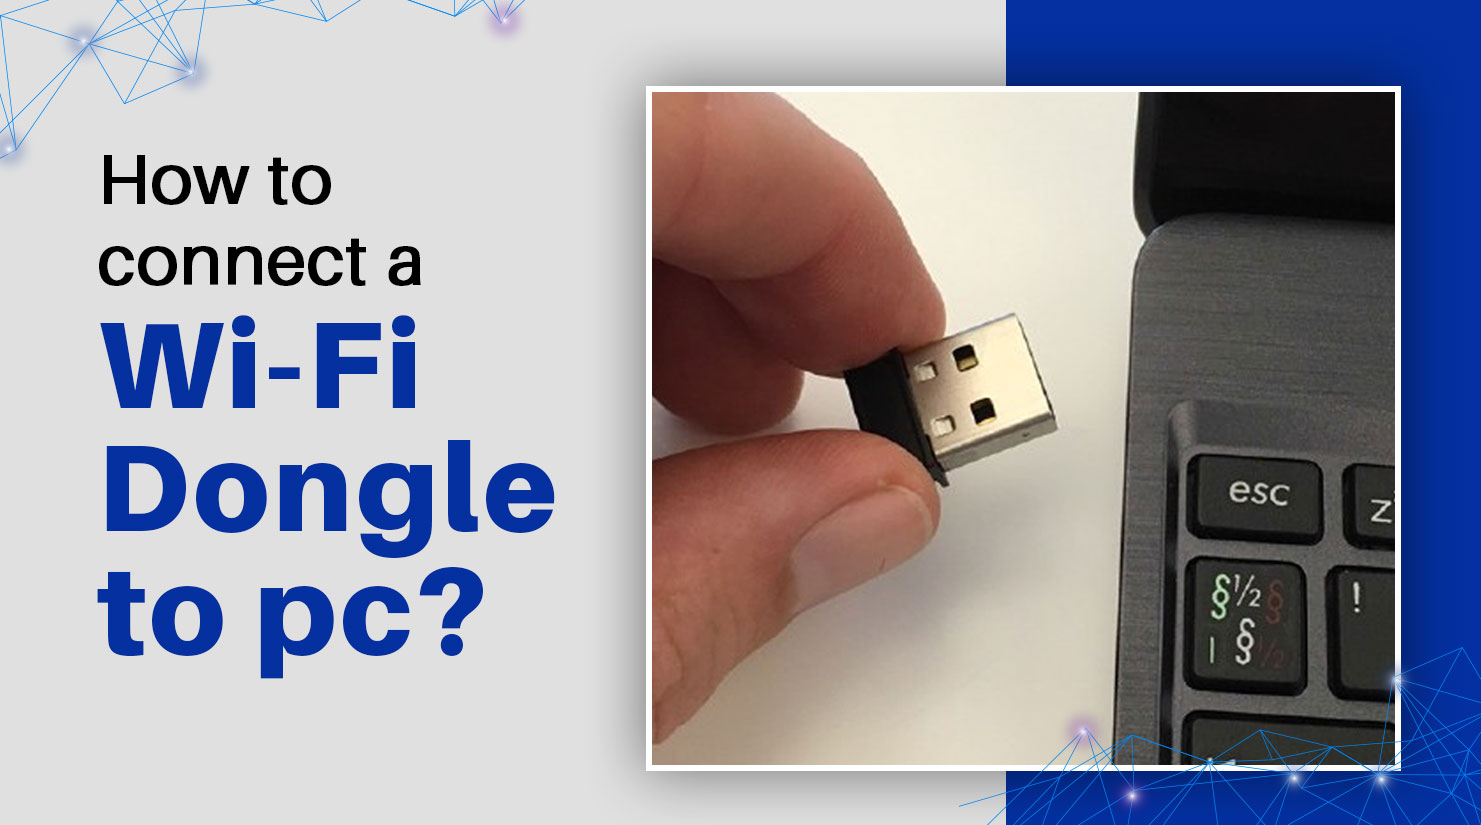 how to connect a wi-fi dongle to pc